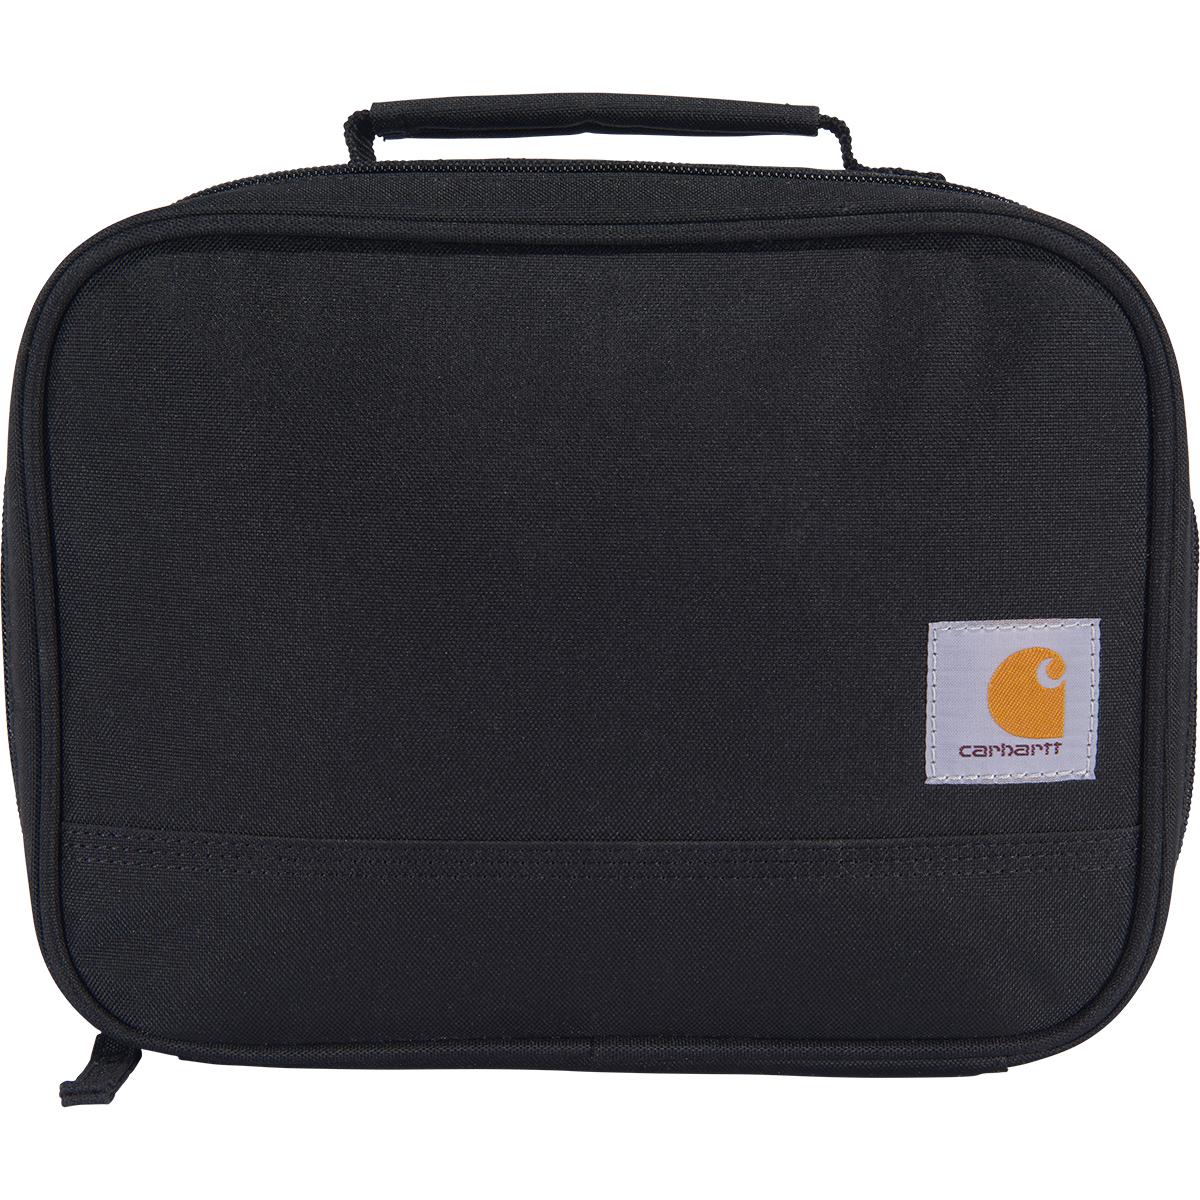 Carhartt Insulated 4-Can Lunch Cooler, Black